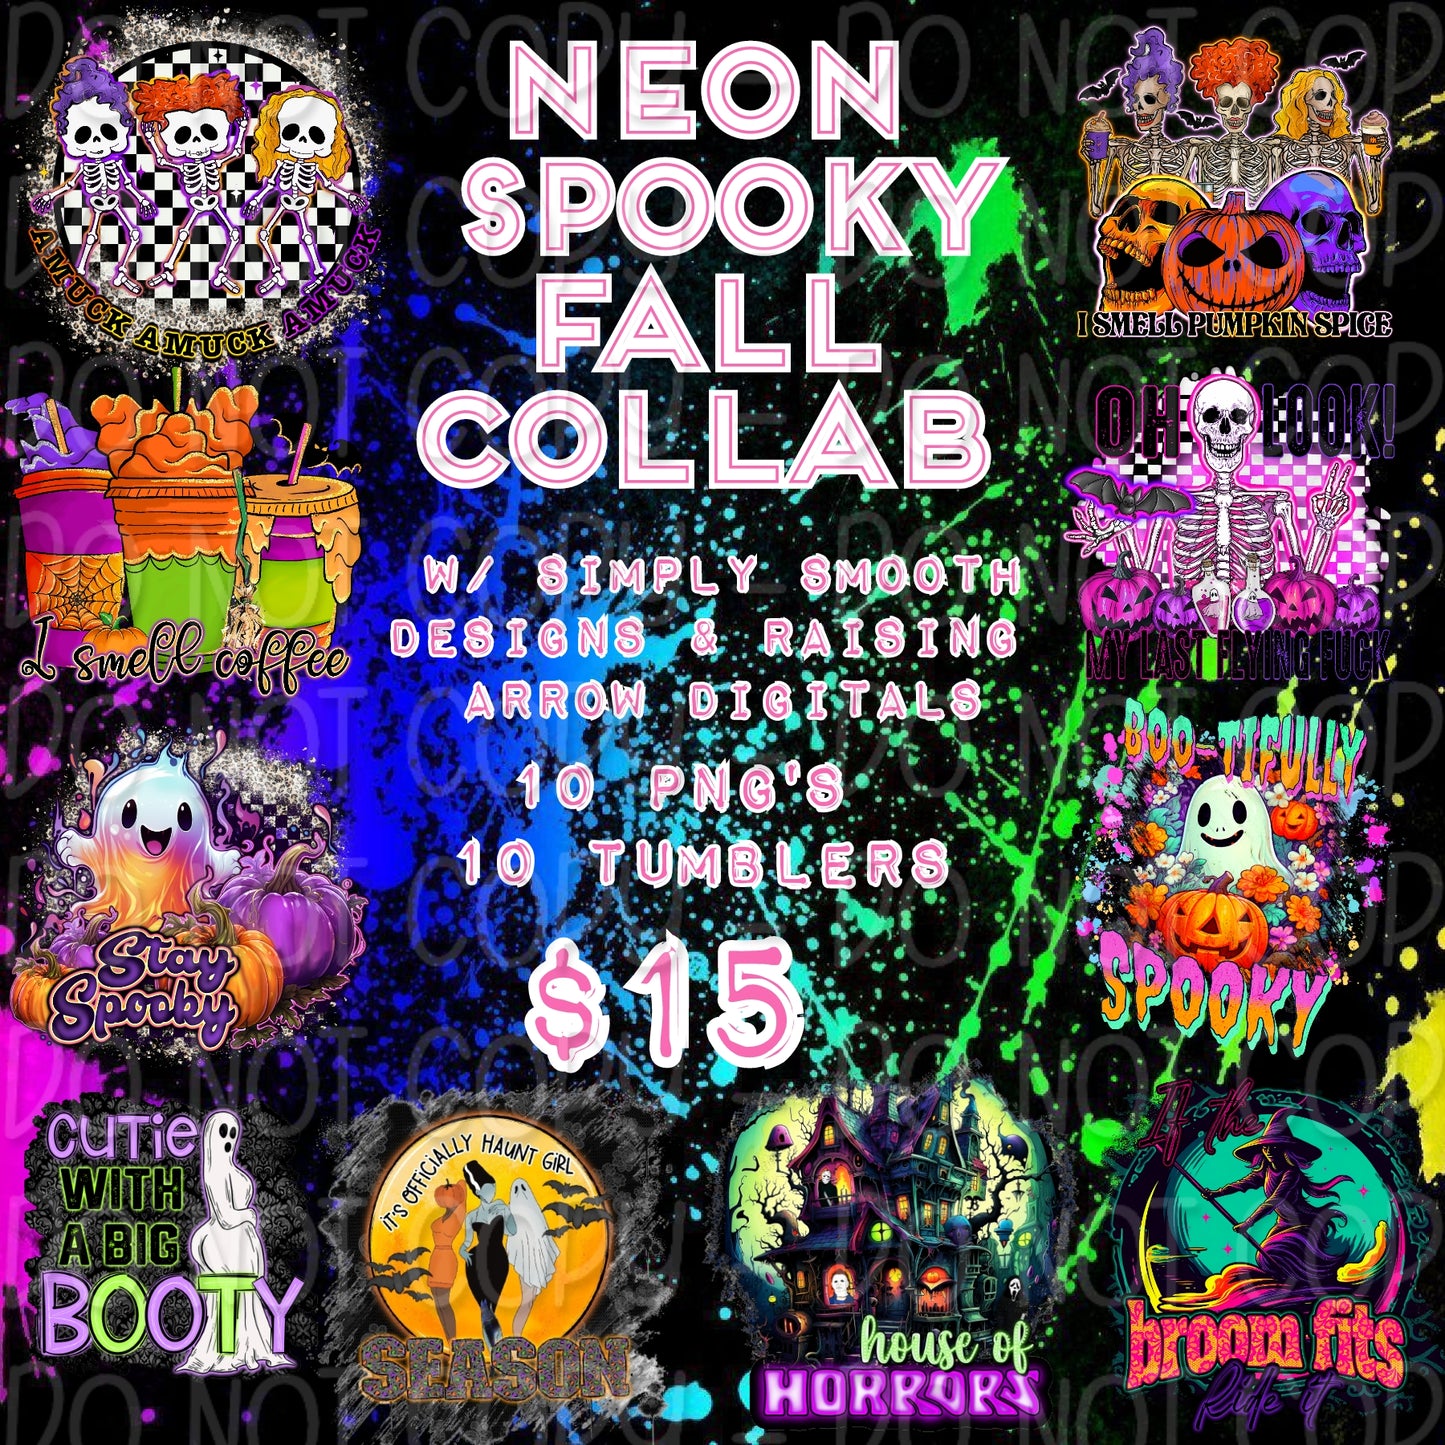 Neon Spooky Fall Collab